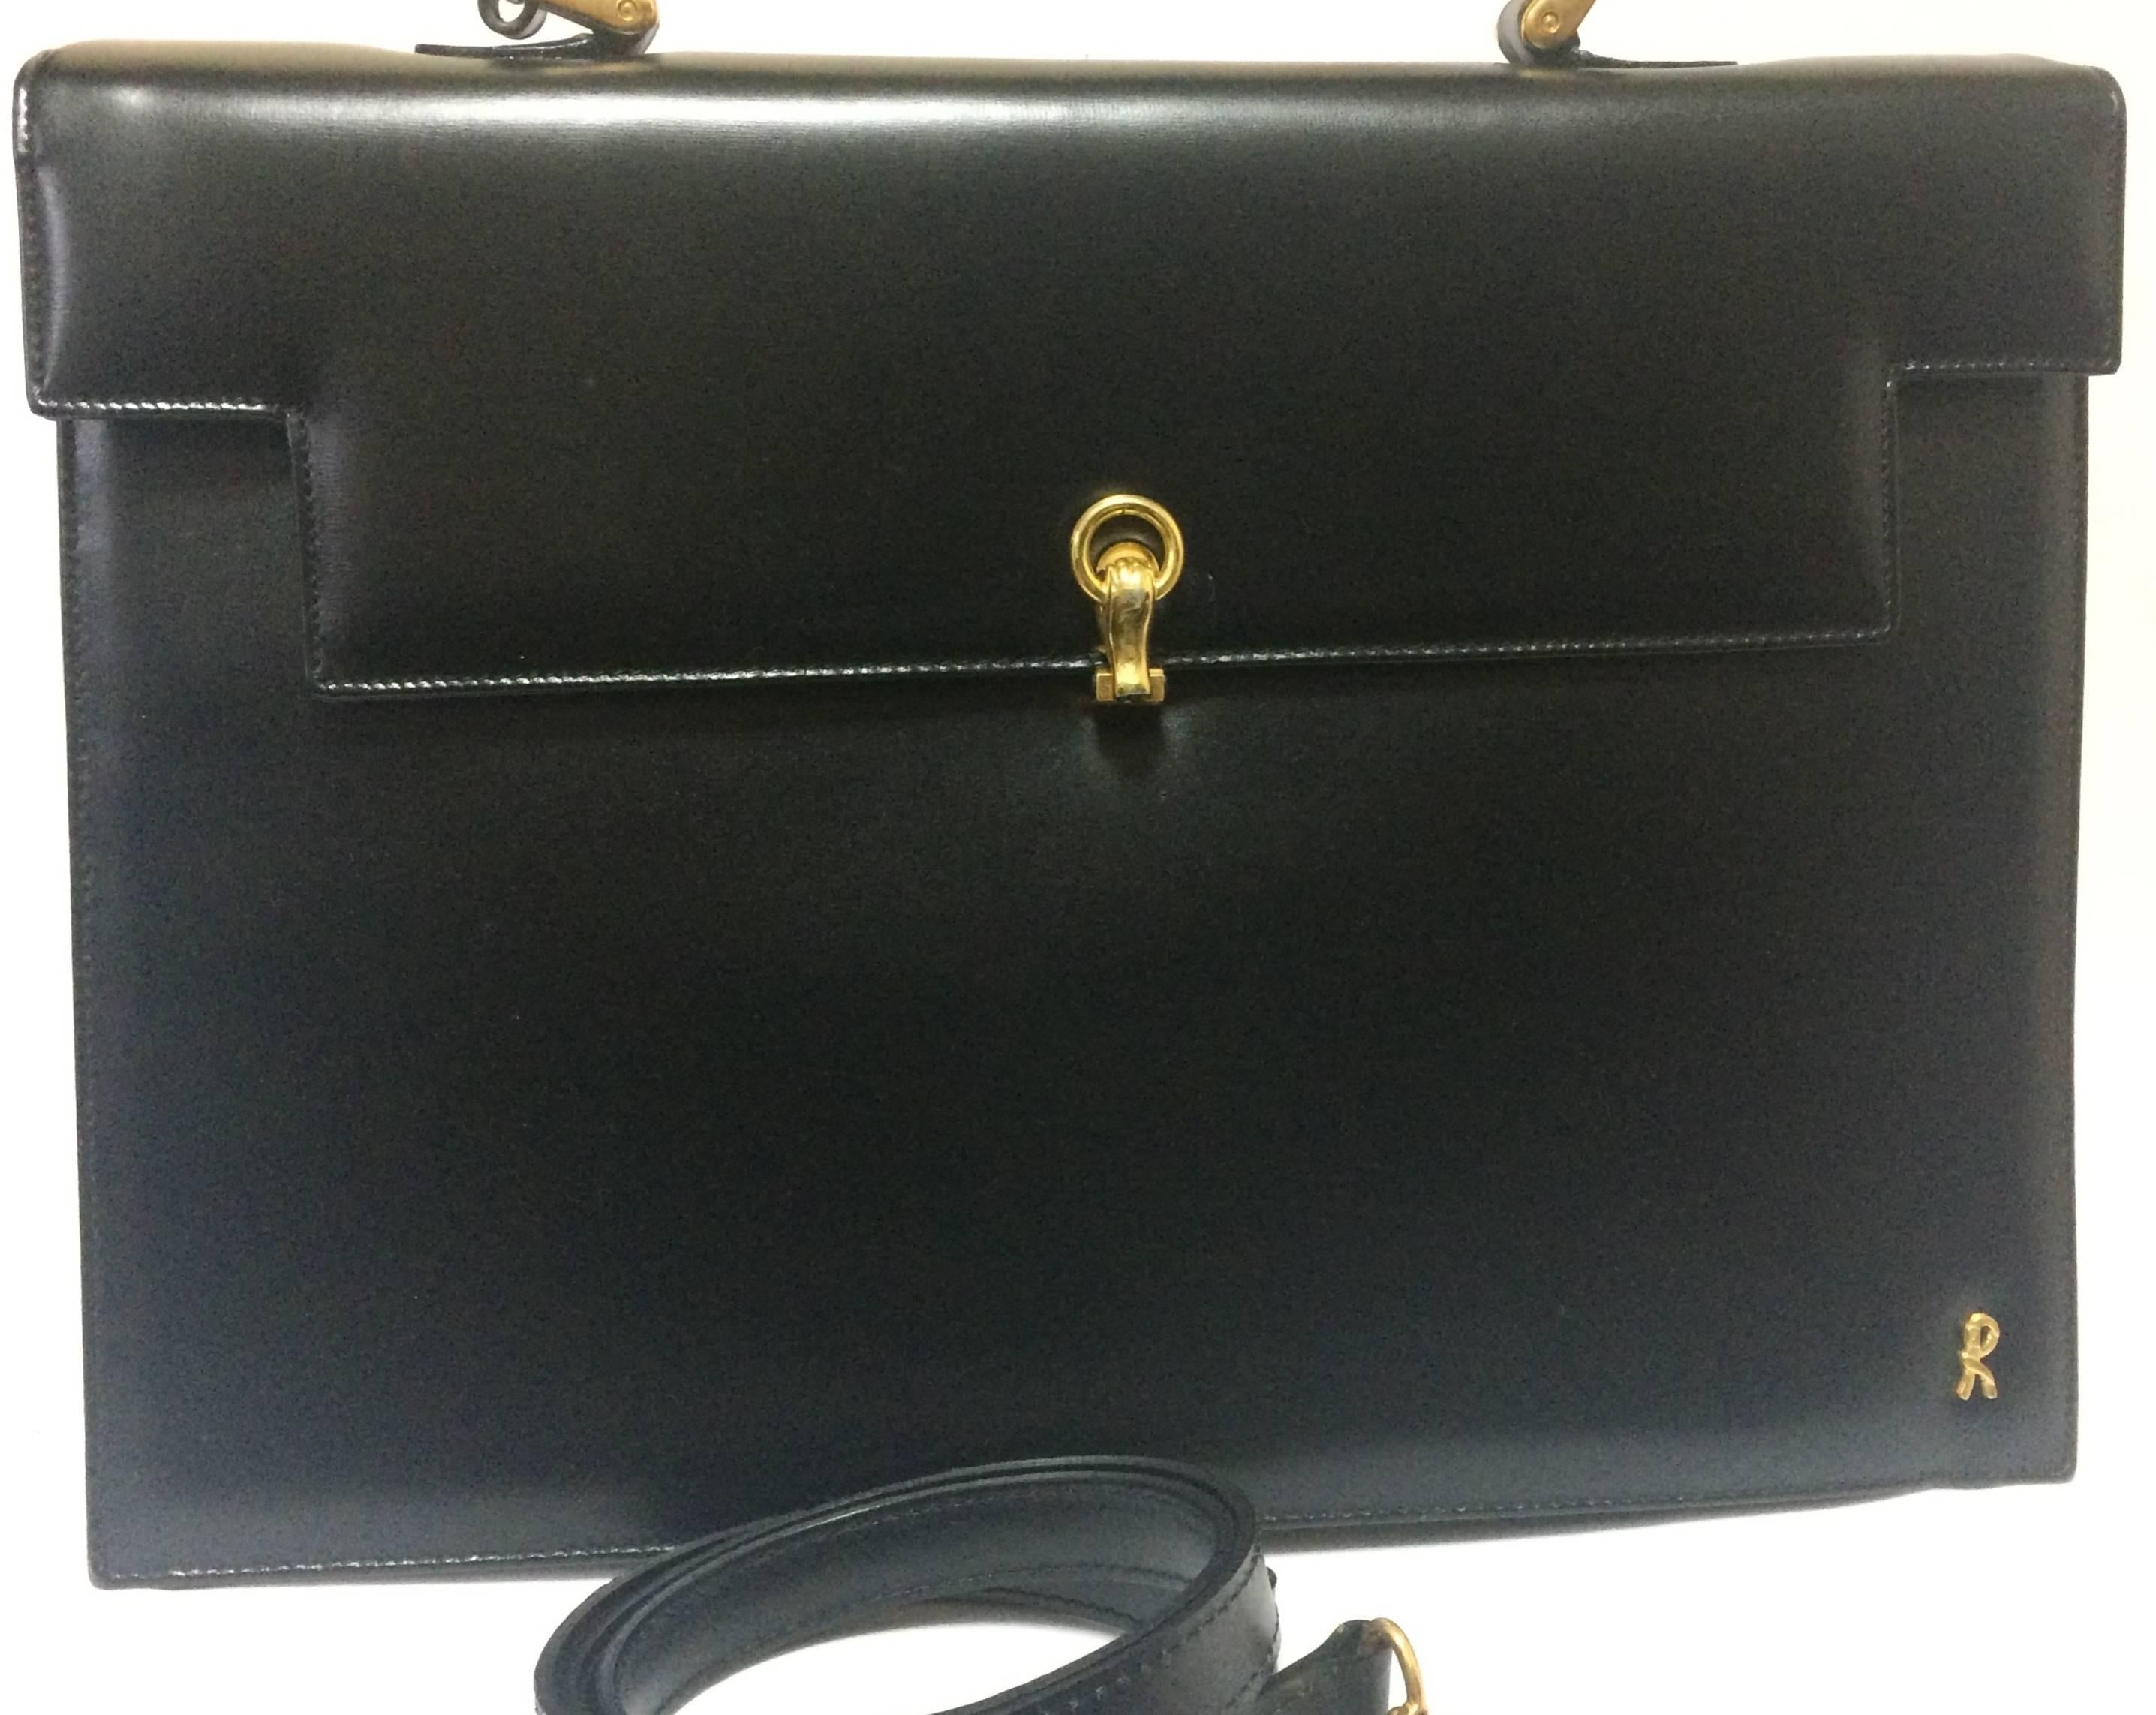 1990s. Vintage Roberta di Camerino black Kelly bag with golden R logo and shoulder strap. Masterpiece from Roberta back in the era.

Introducing a vintage Kelly style leather bag from Roberta di Camerino back in the 90's.
If you are a fan or